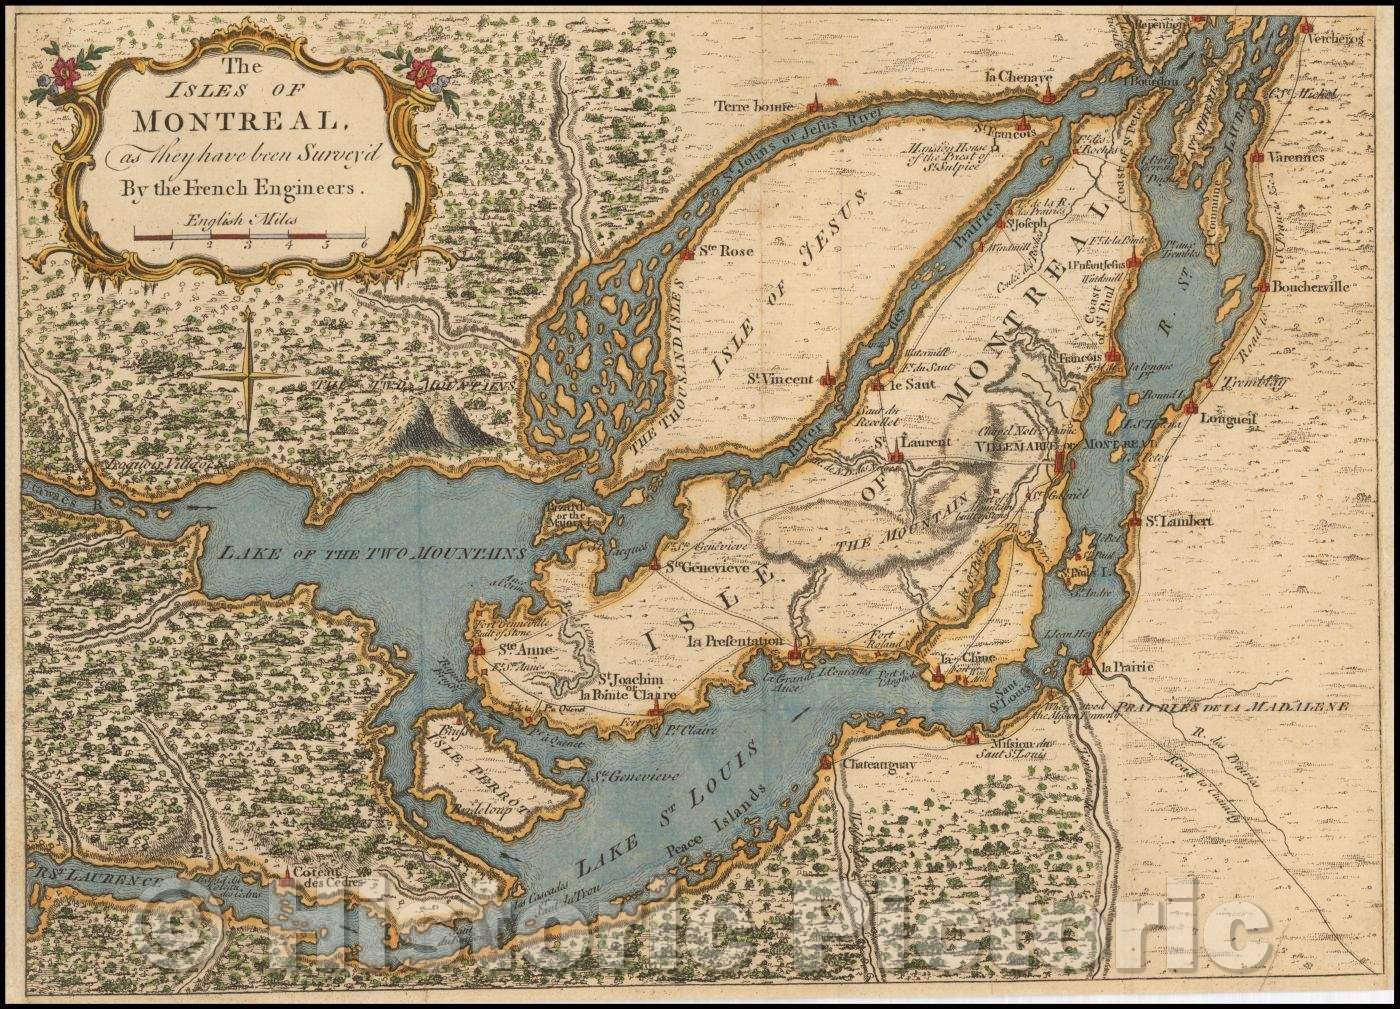 Historic Map - The Isles of Montreal as they have been Survey'd, 1761, London Magazine v2